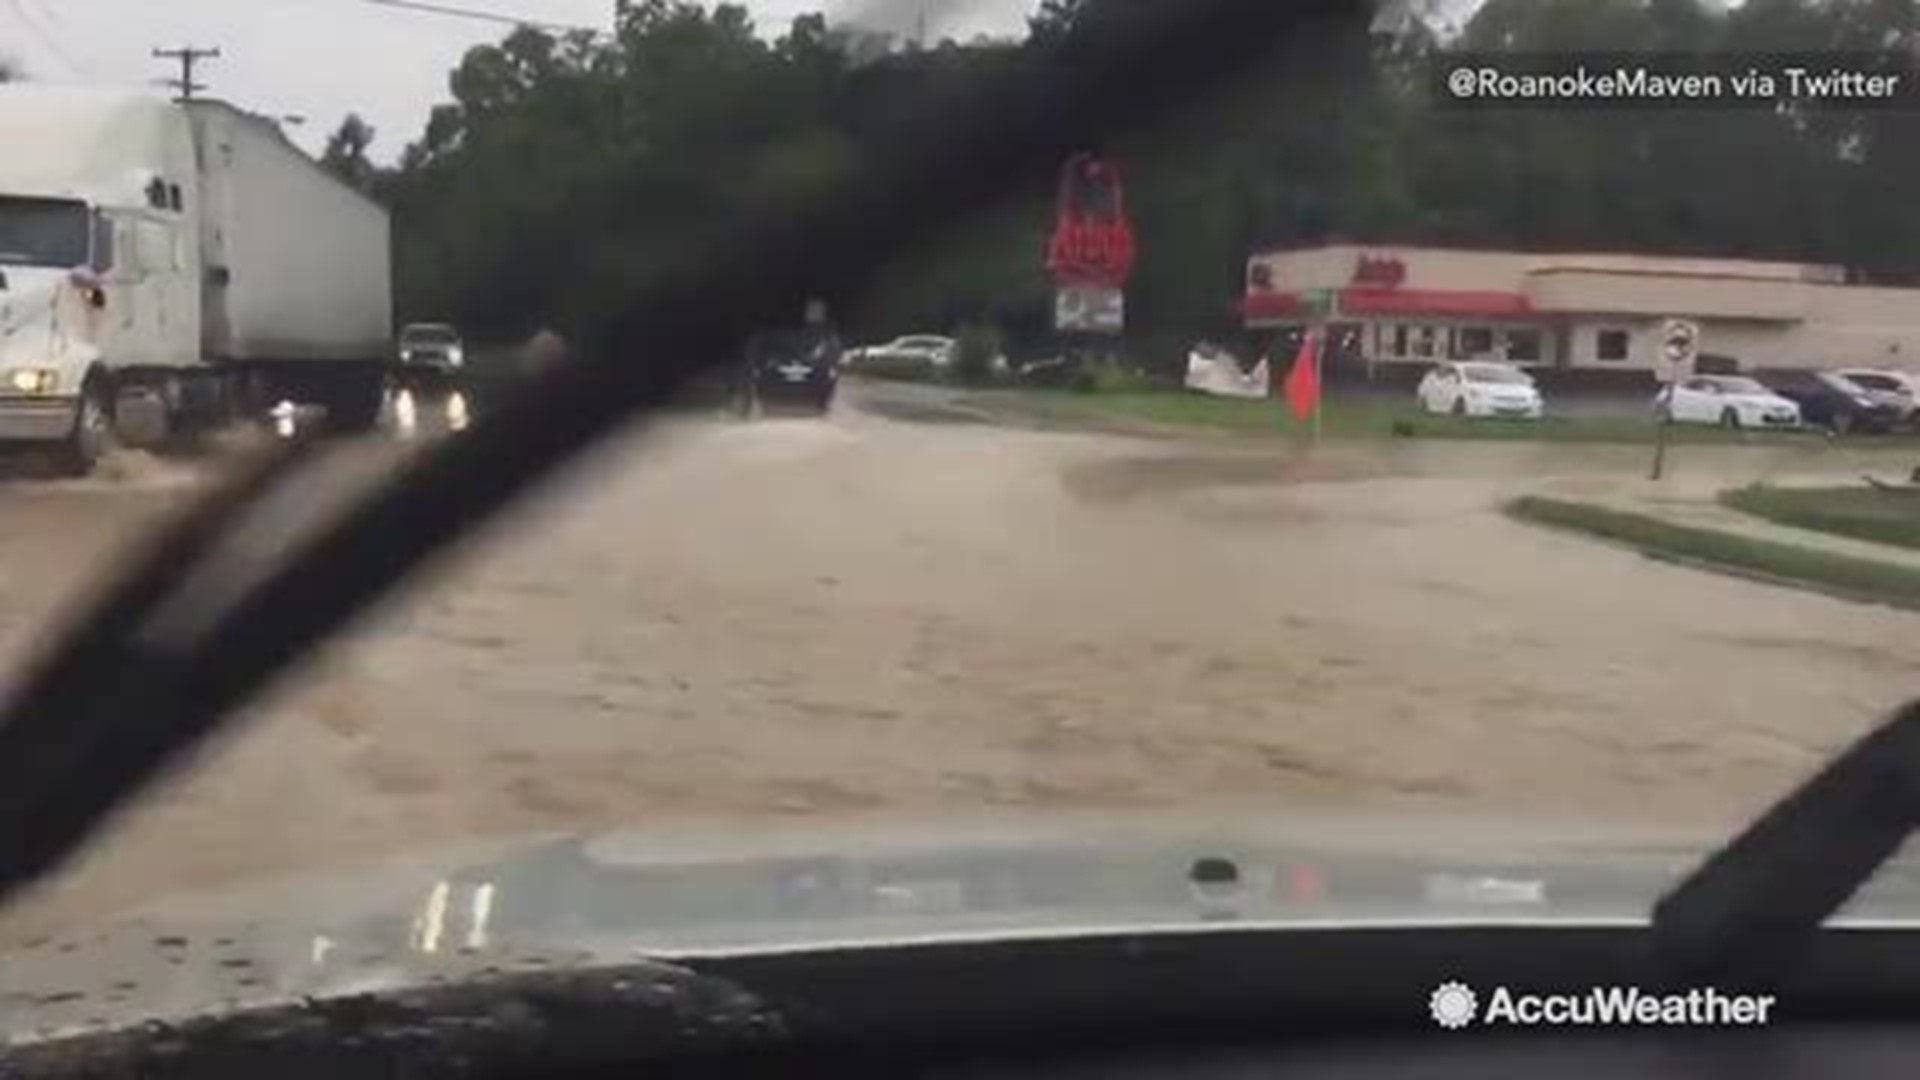 This is the scene at the intersection of Wildwood Rd and Main Street in Salem, VA. Christina Garnett, a Virginia resident, captured footage of high flood waters from Hurricane Michael as she made her way home.